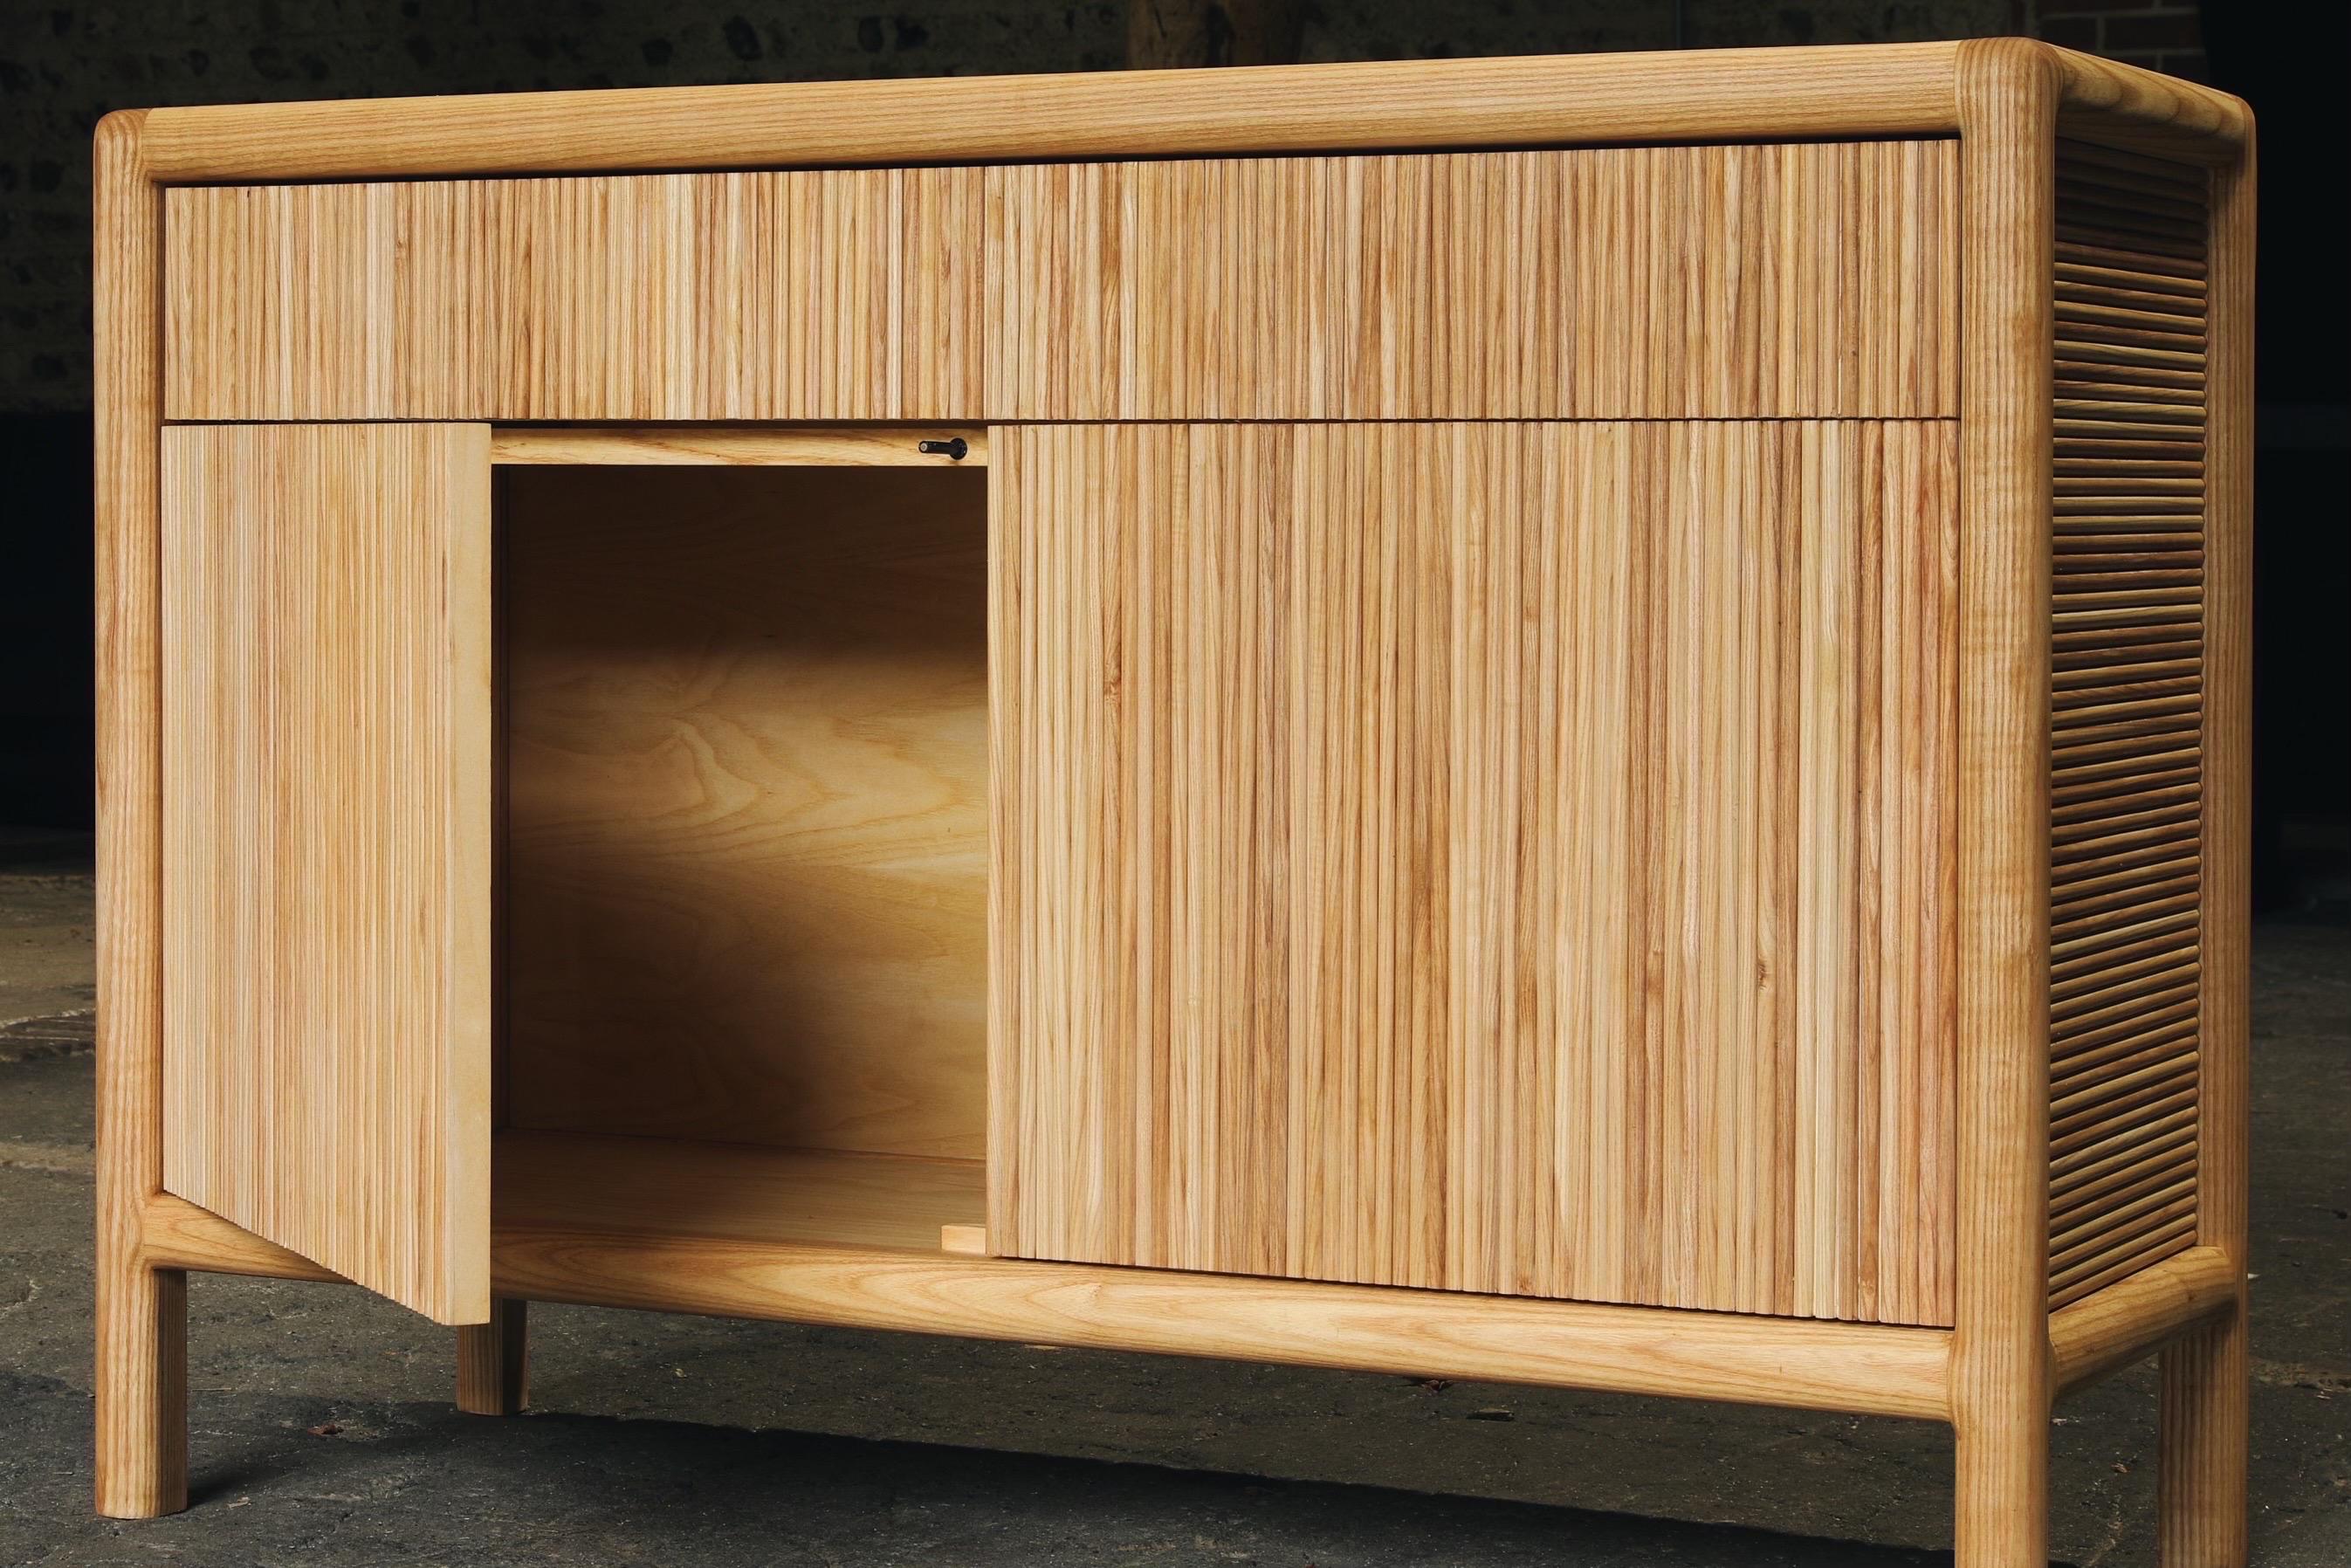 Hand made using English ash, this sideboard has nearly 400m of half round solid ash hand fixed to the outside of the cabinet.

Easily a piece that will last a lifetime and one that will stand out in any bodies home.

Size of one pictured 1200w